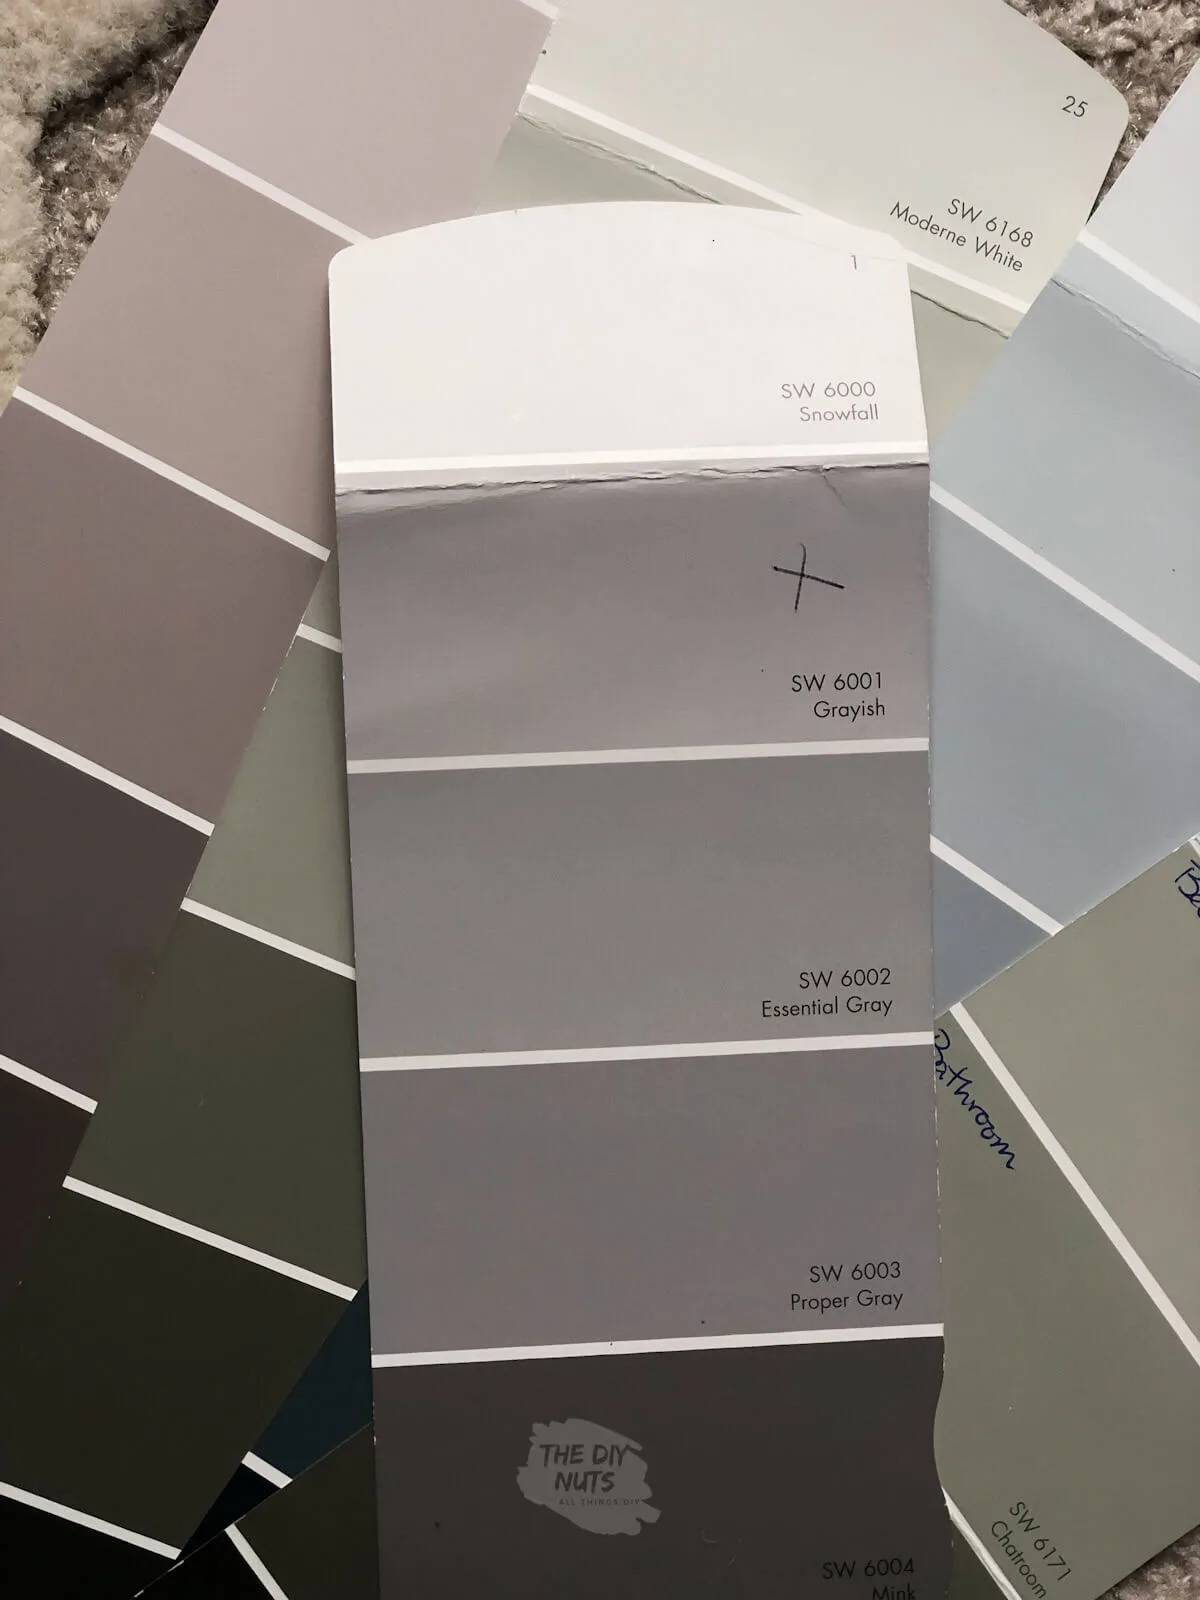 Sherwin Williams gray paint swatch with grayish, essential gray, proper gray